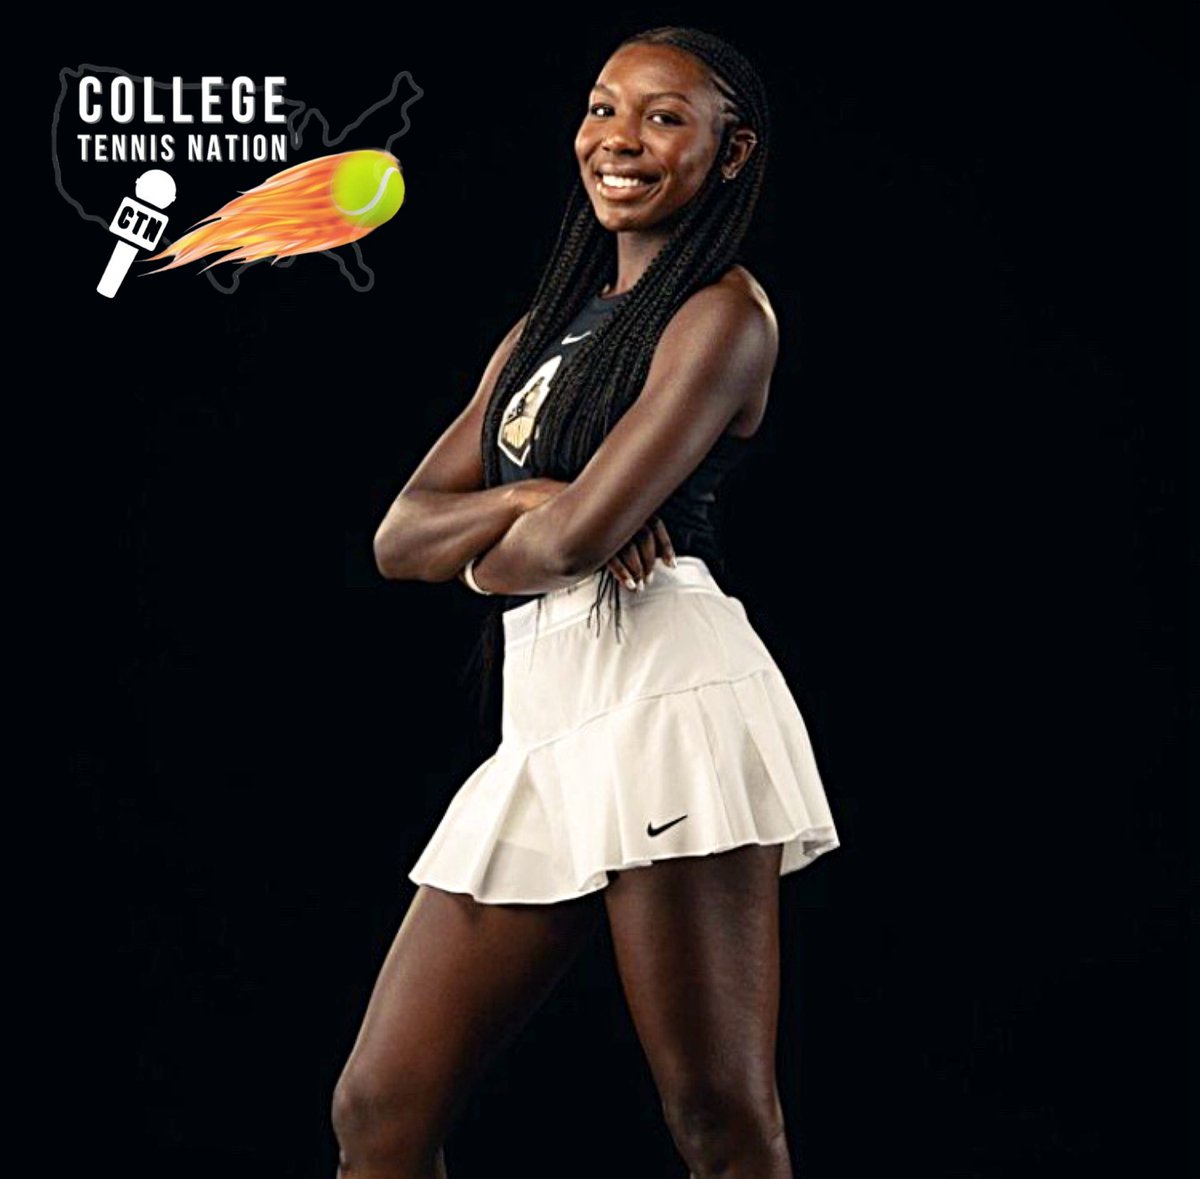 BREAKING: Purdue Transfer Kennedy Gibbs has committed to Baylor, sources tell @CTennisNation. The Houston, Texas native played at lines 2 & 3 singles for the Boilermakers, having a record of 11-4 this spring. (10.06 UTR) Gibbs is a former Five-Star Recruit.